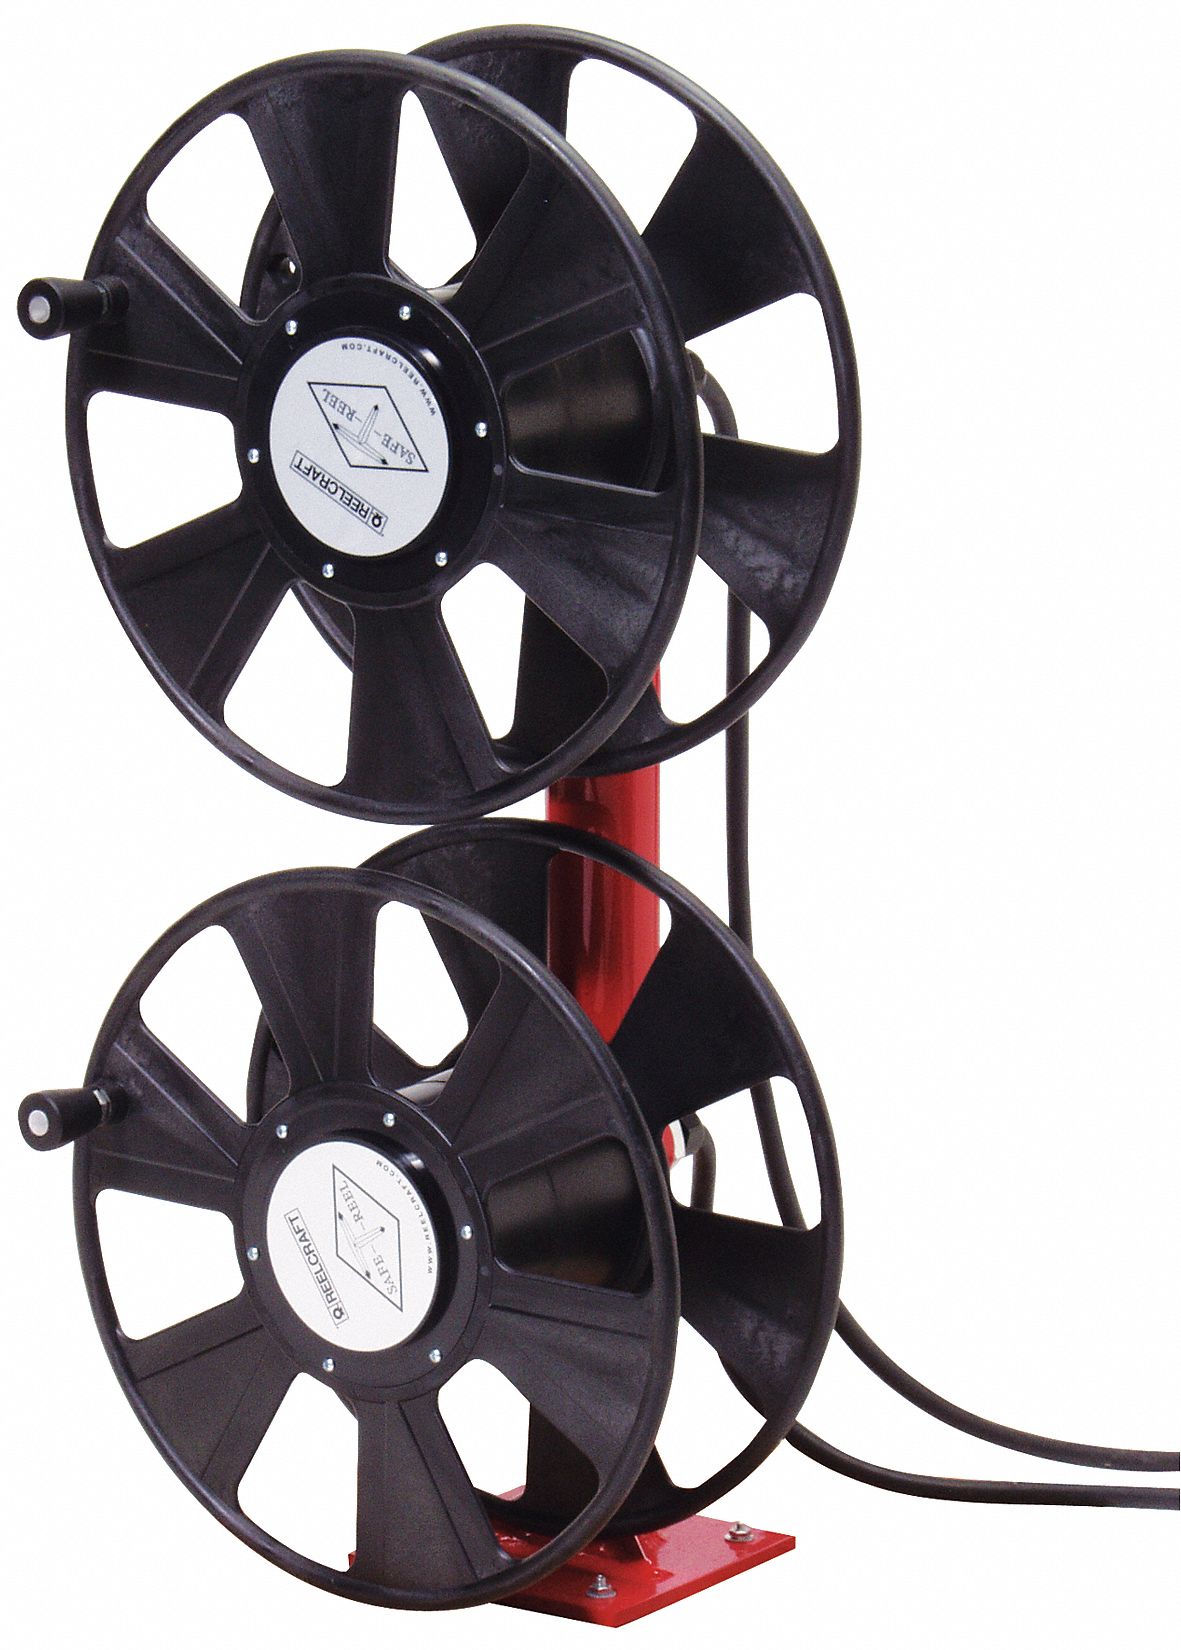 Reelcraft Dual Cable Reel Welding Model: T2464-0